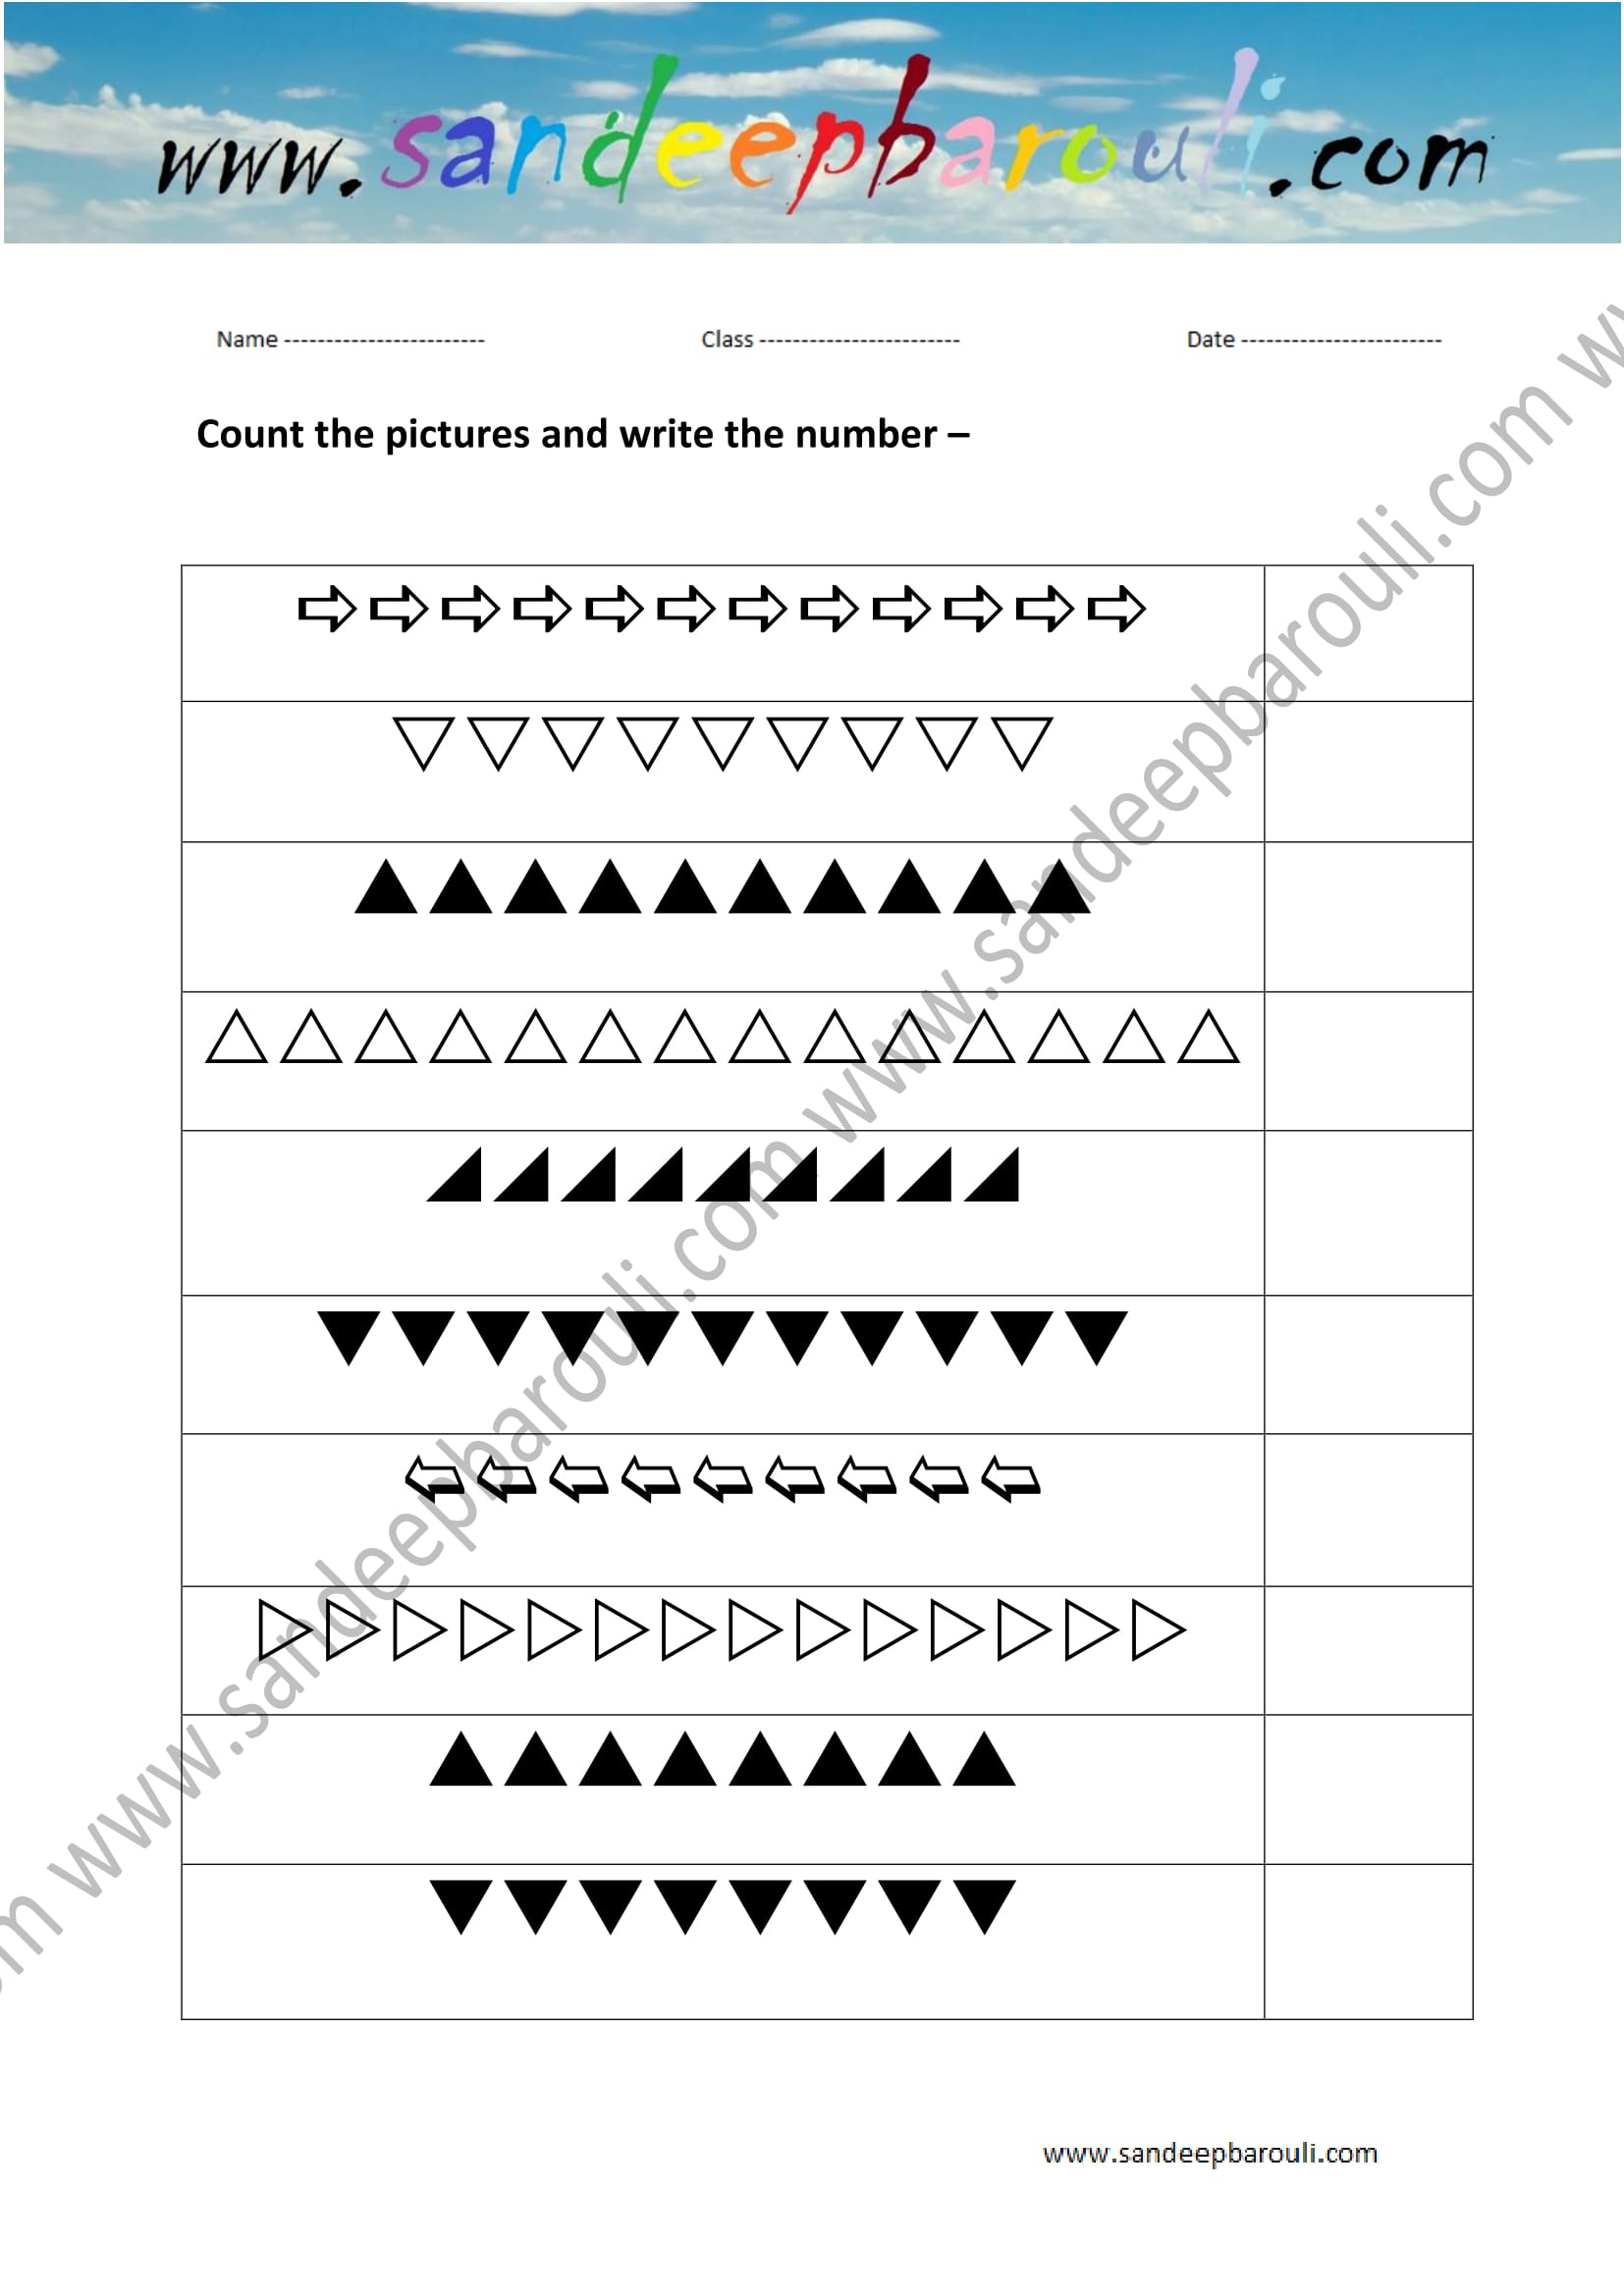 Count the Picture and Write the Number Worksheet (13)